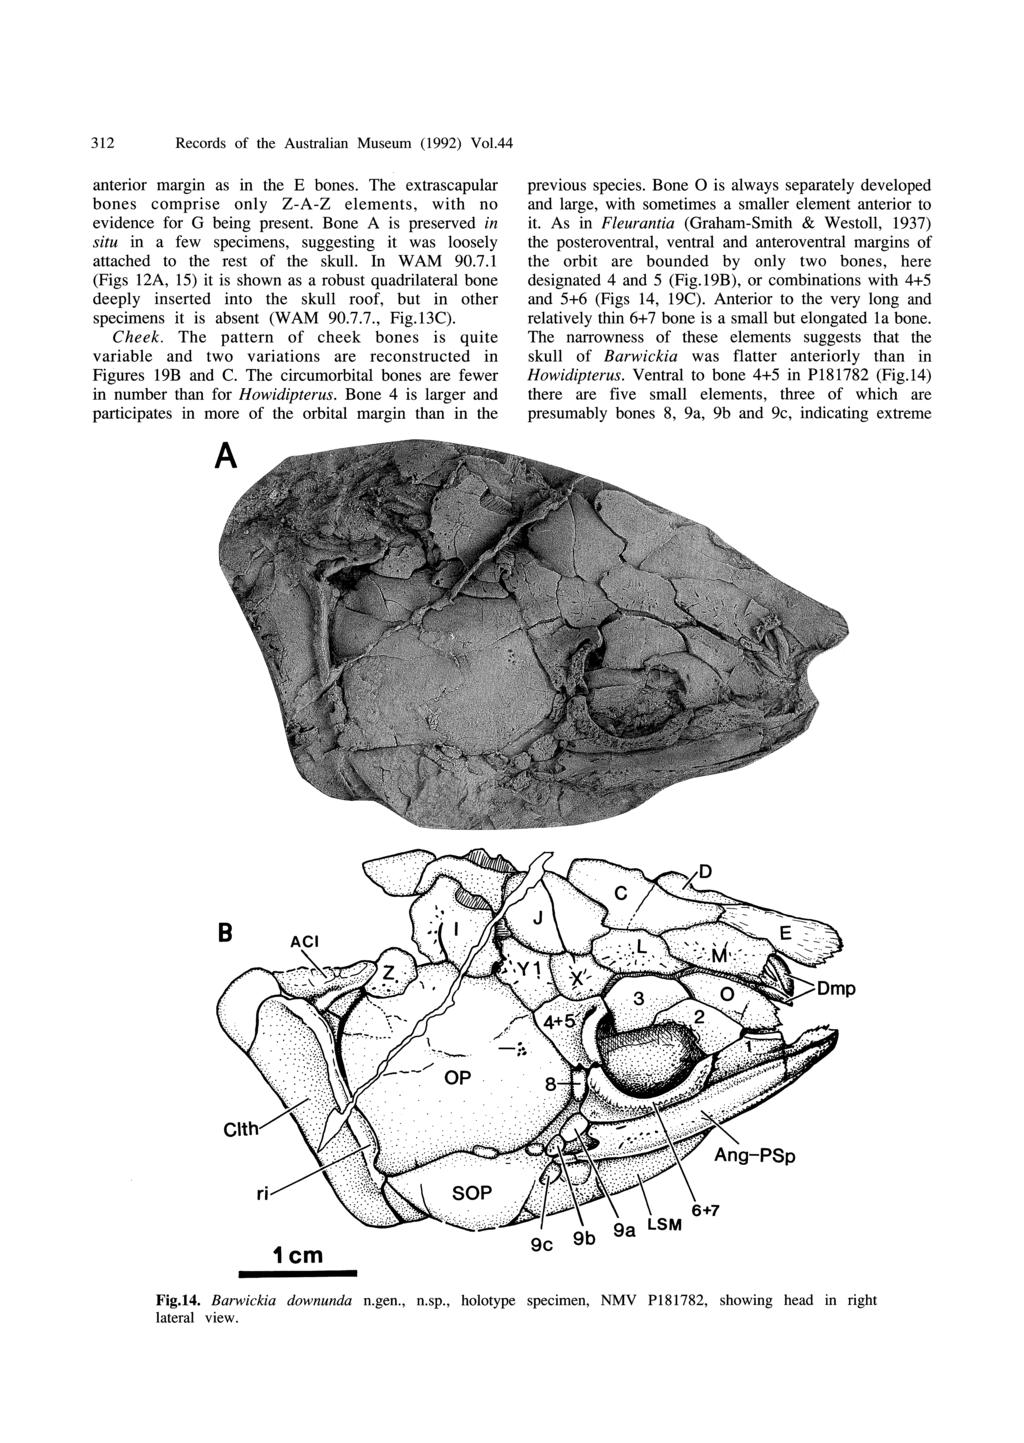 312 Records of the Australian Museum (1992) Vo1.44 anterior margin as in the E bones. The extrascapular bones comprise only Z-A-Z elements, with no evidence for G being present.